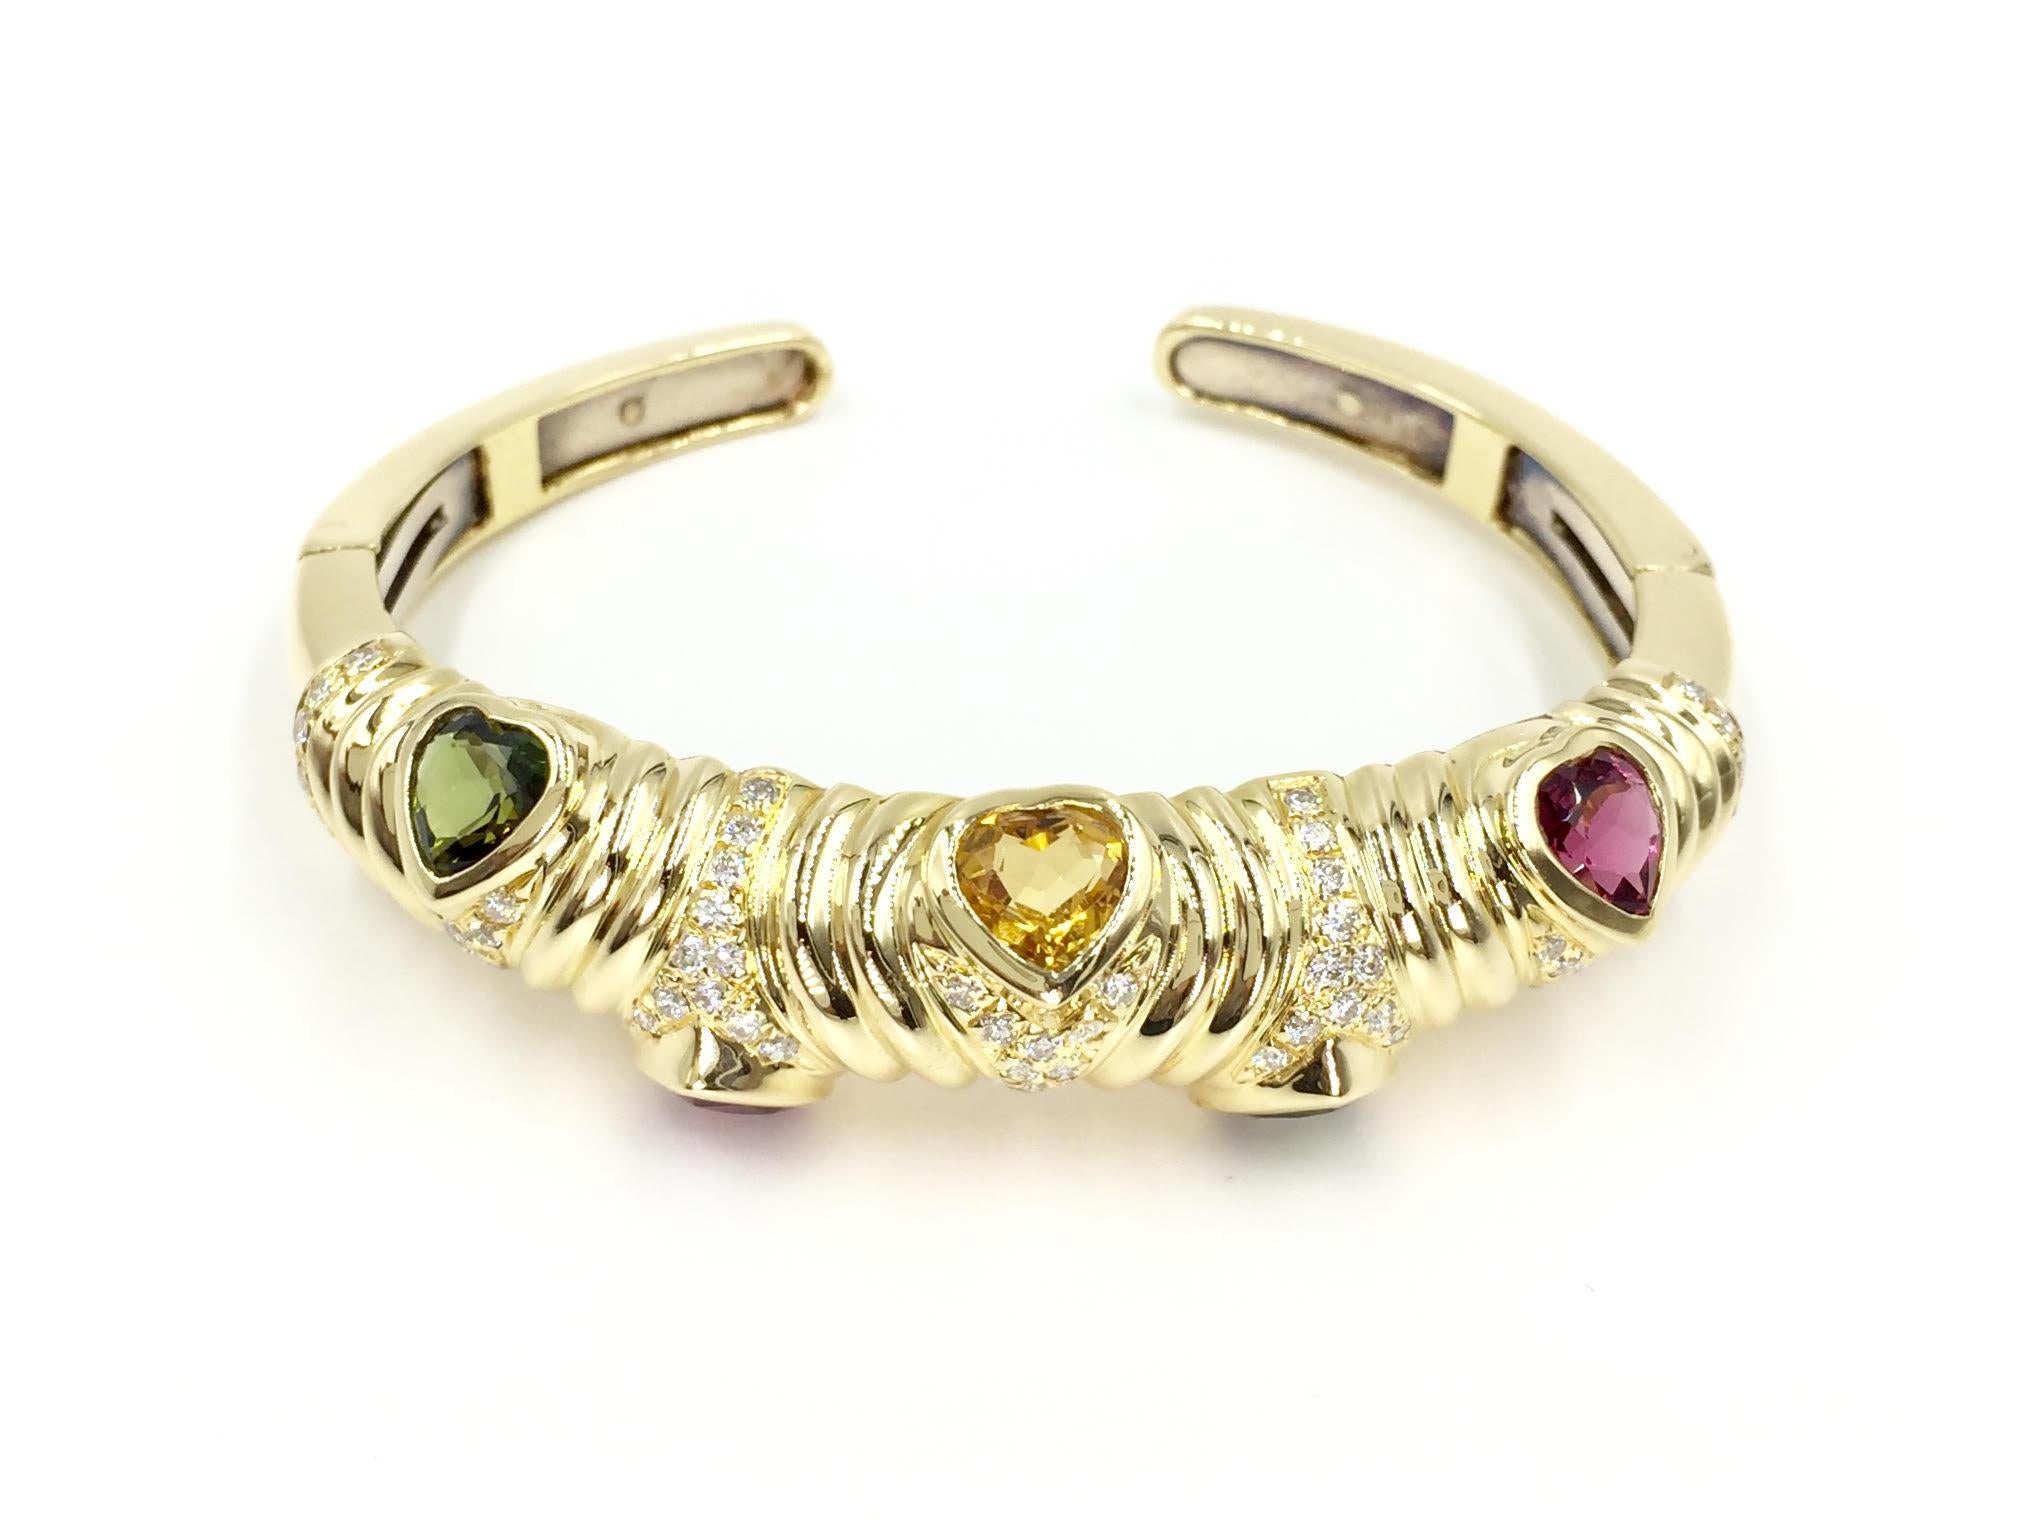 18 Karat Gold Cuff Bracelet with Diamonds and Semi-Precious Heart Shape Stones In Good Condition For Sale In Pikesville, MD